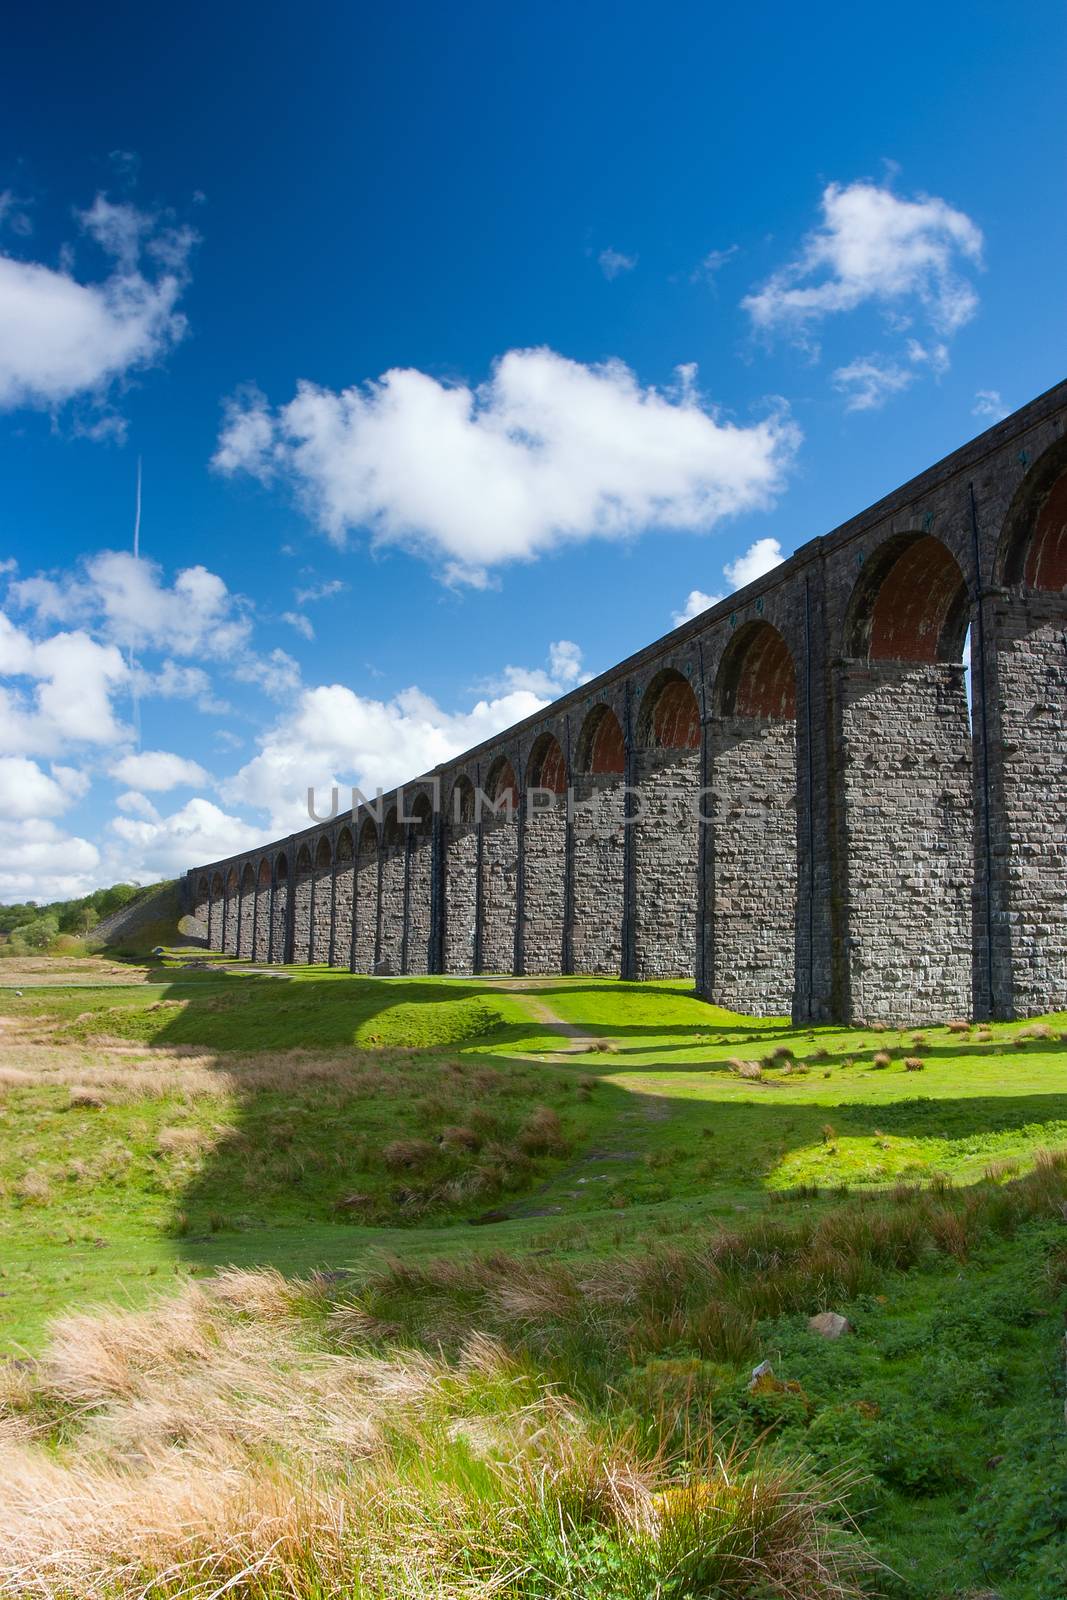 Famous Ribblehead Viaduct in Yorkshire Dales National Park,Great Britain